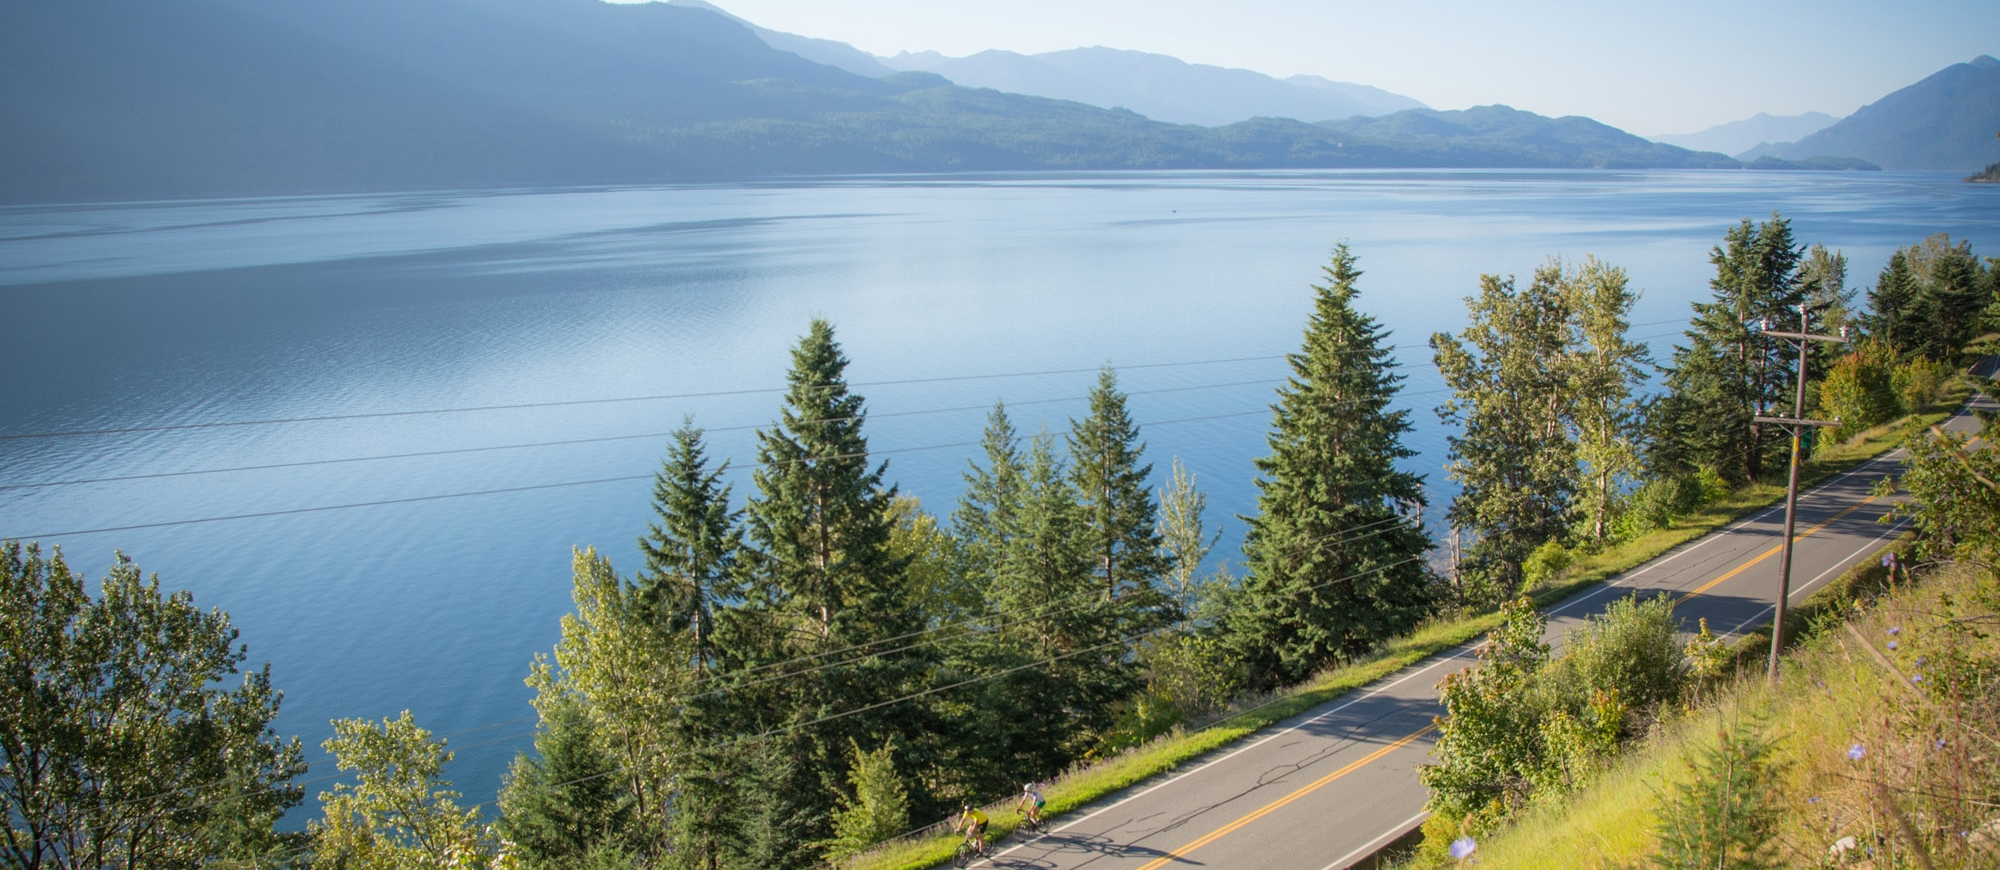 Two cyclists riding along the Highway near Kaslo, BC